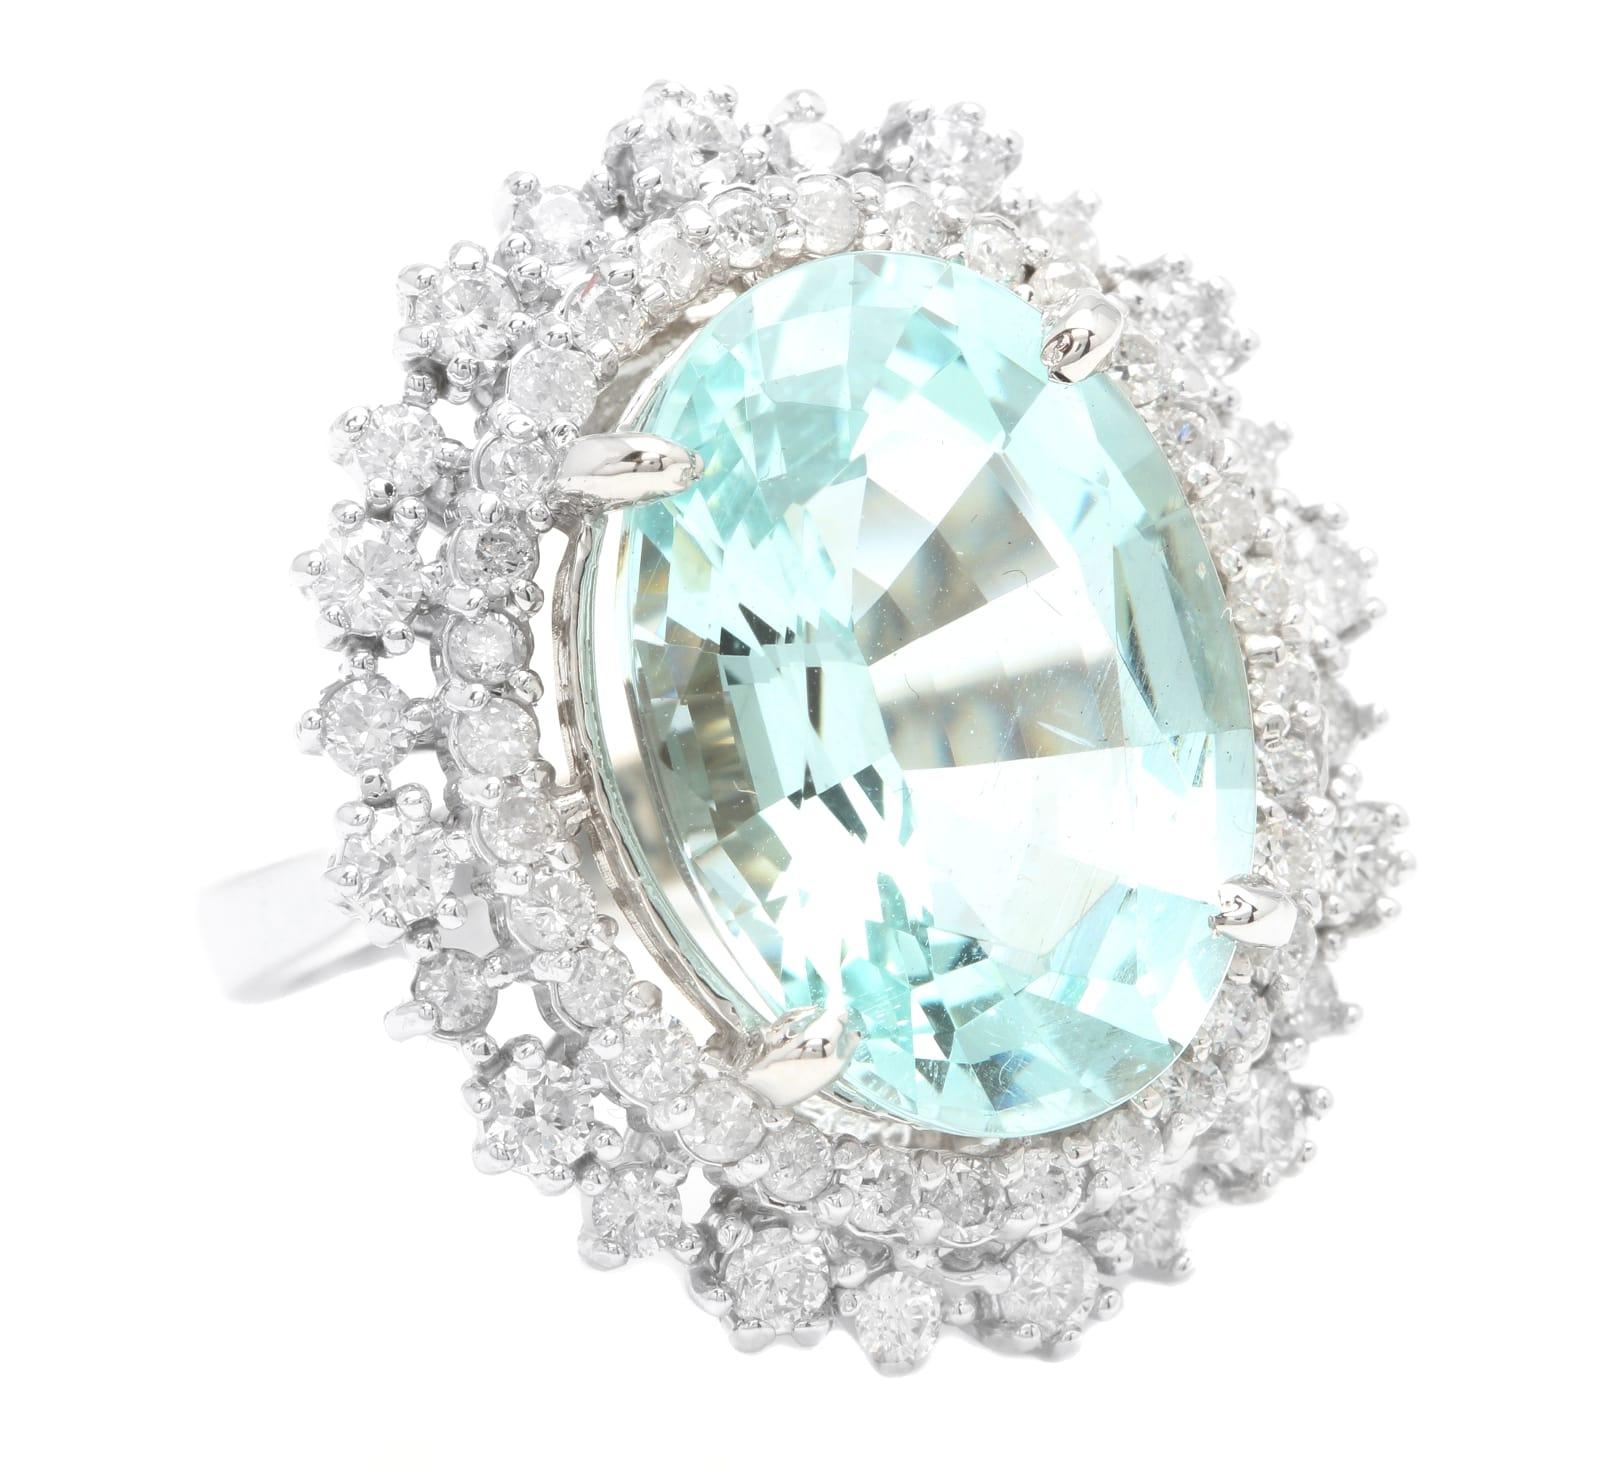 11.10 Carats Exquisite Natural Aquamarine and Diamond 14K Solid White Gold Ring

Suggested Replacement Value: Approx. 8,600.00

Total Natural Aquamarine Weight is: Approx. 9.50 Carats 

Aquamarine Treatment: Heat

 Aquamarine Measures: Approx. 18.00